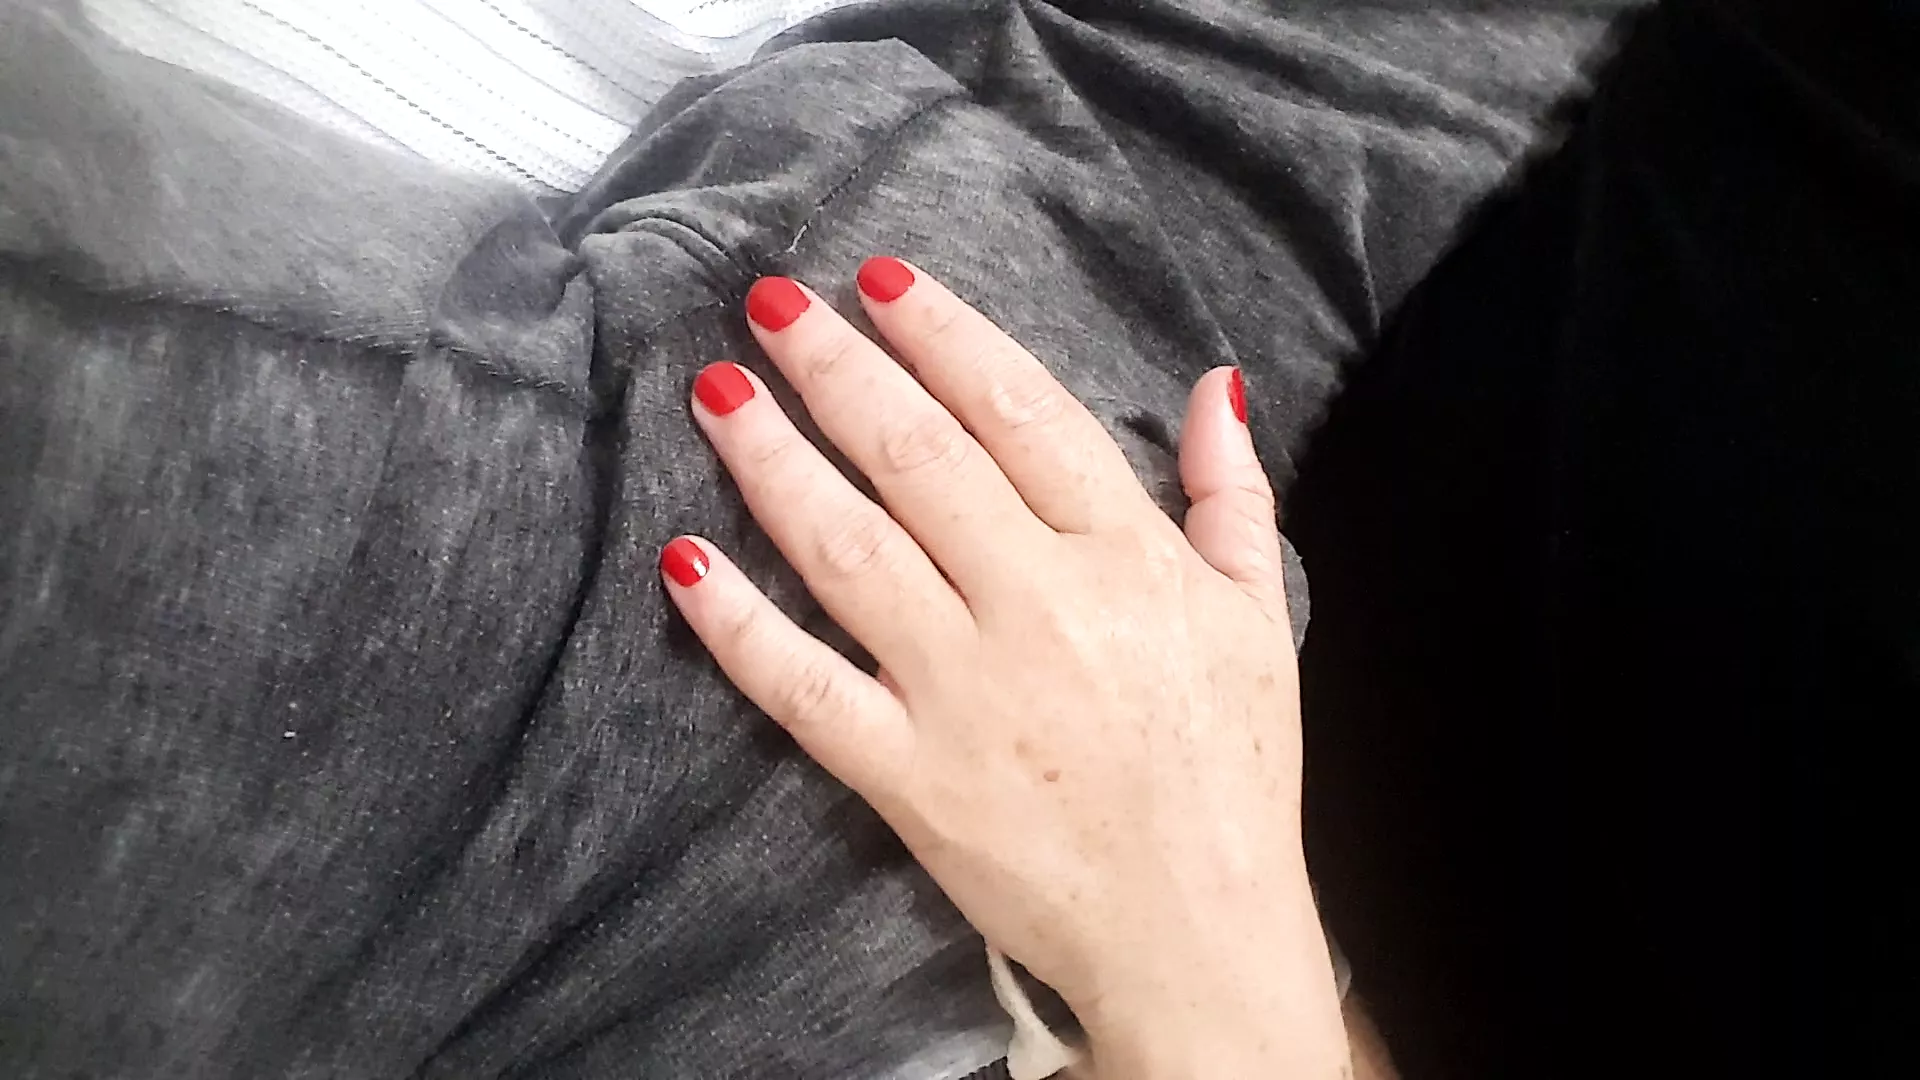 Shy older Gf touches and gropes my cock next to friends